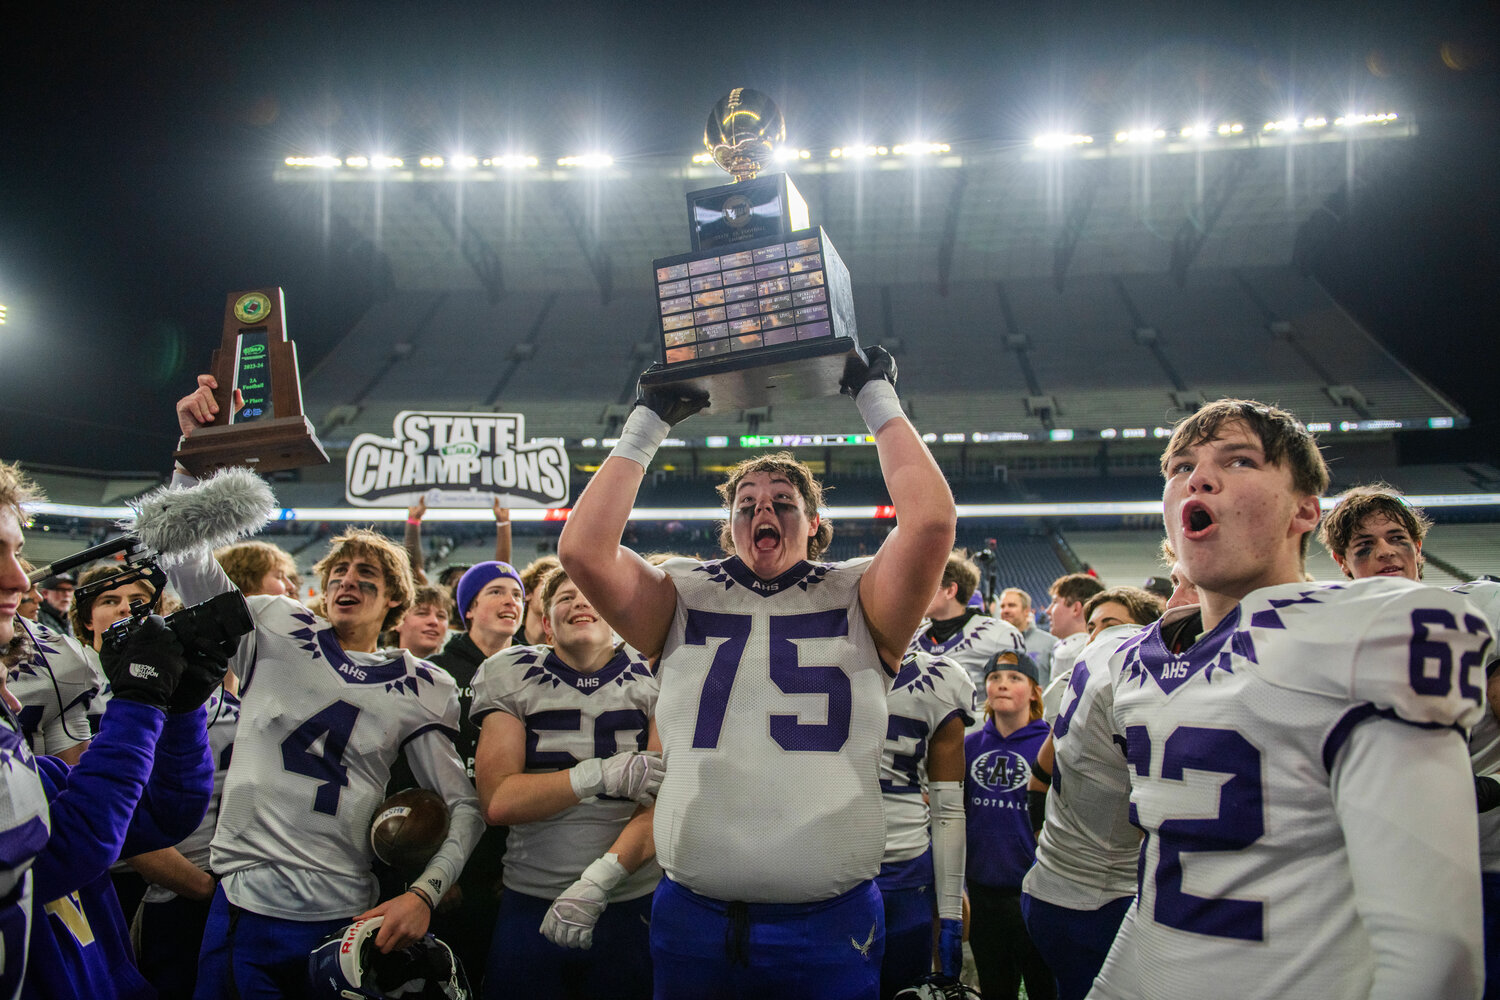 Anacortes lineman Kyle Leseman (75) hoists the 2A State Championship trophy high after the team’s first-ever state title win at Husky Stadium on Saturday, Dec. 2.